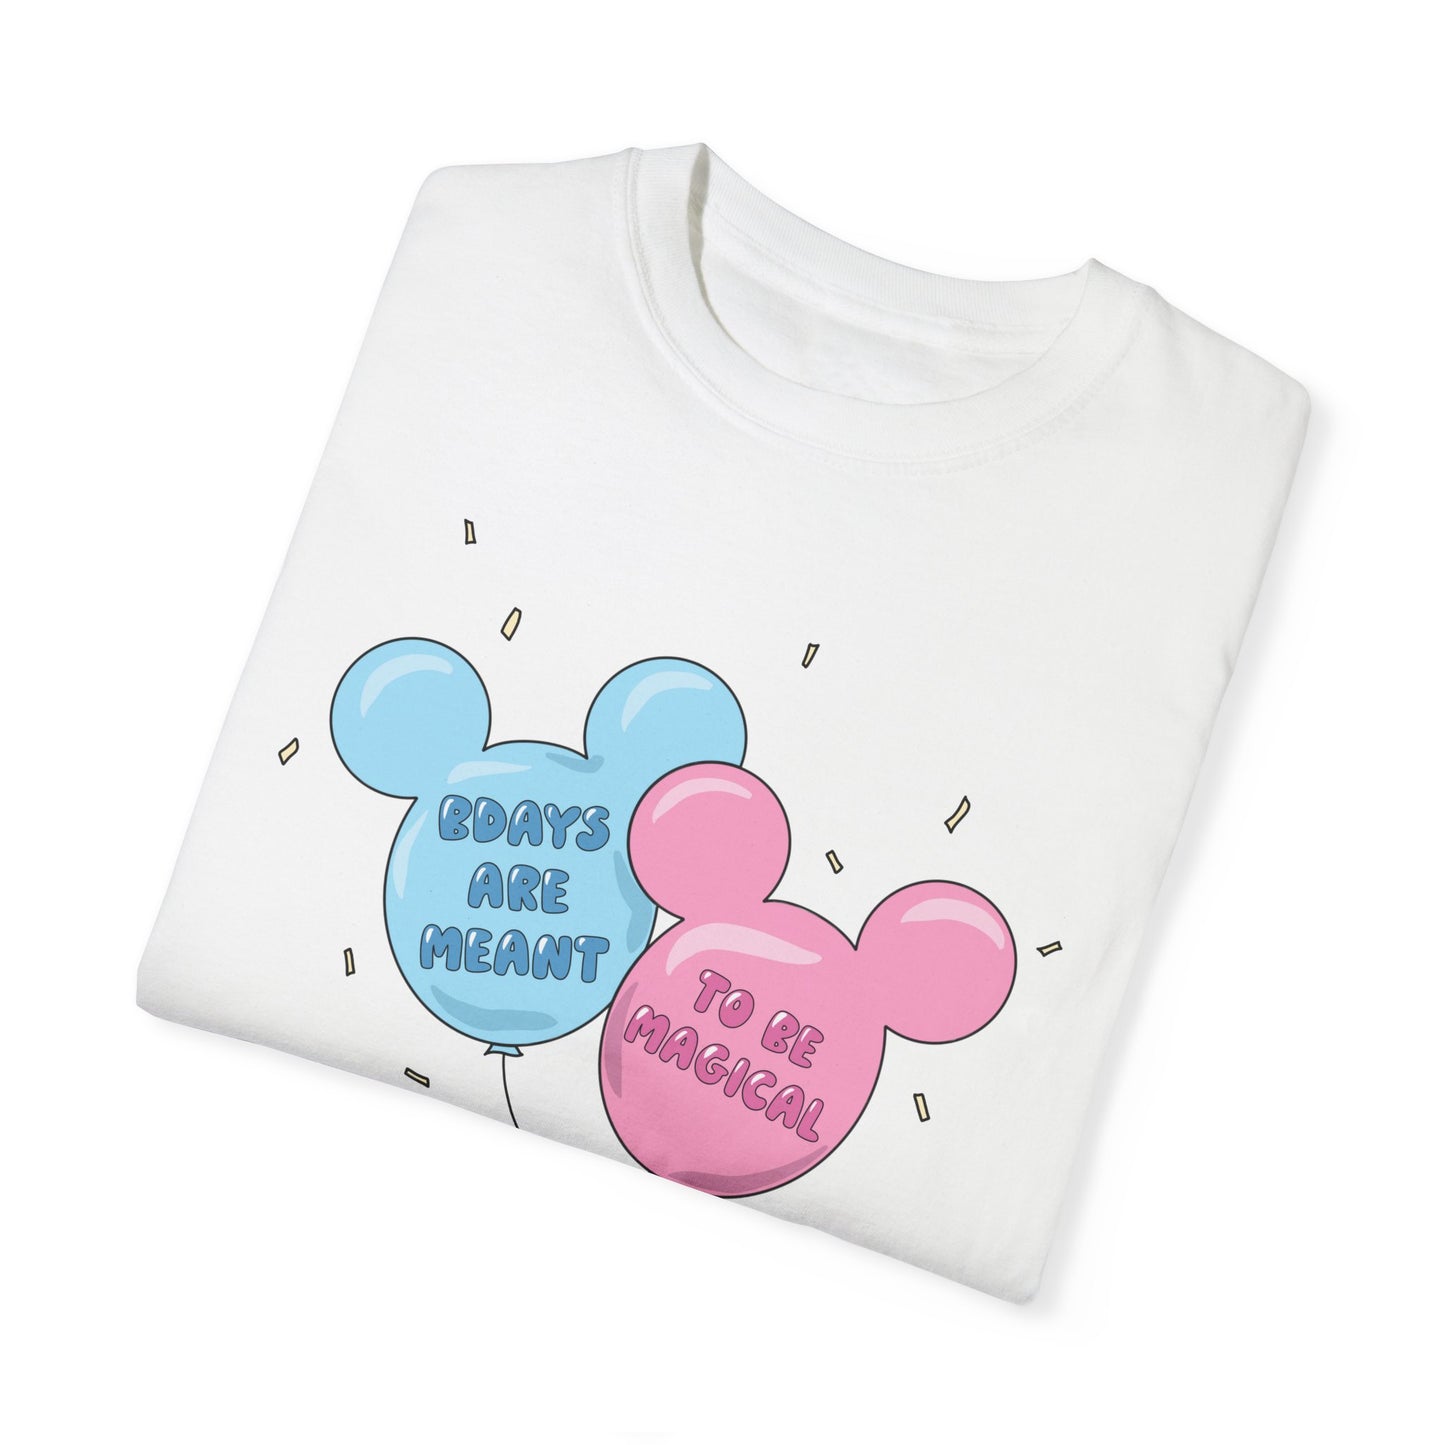 Adult Bdays are meant to be magical Tee